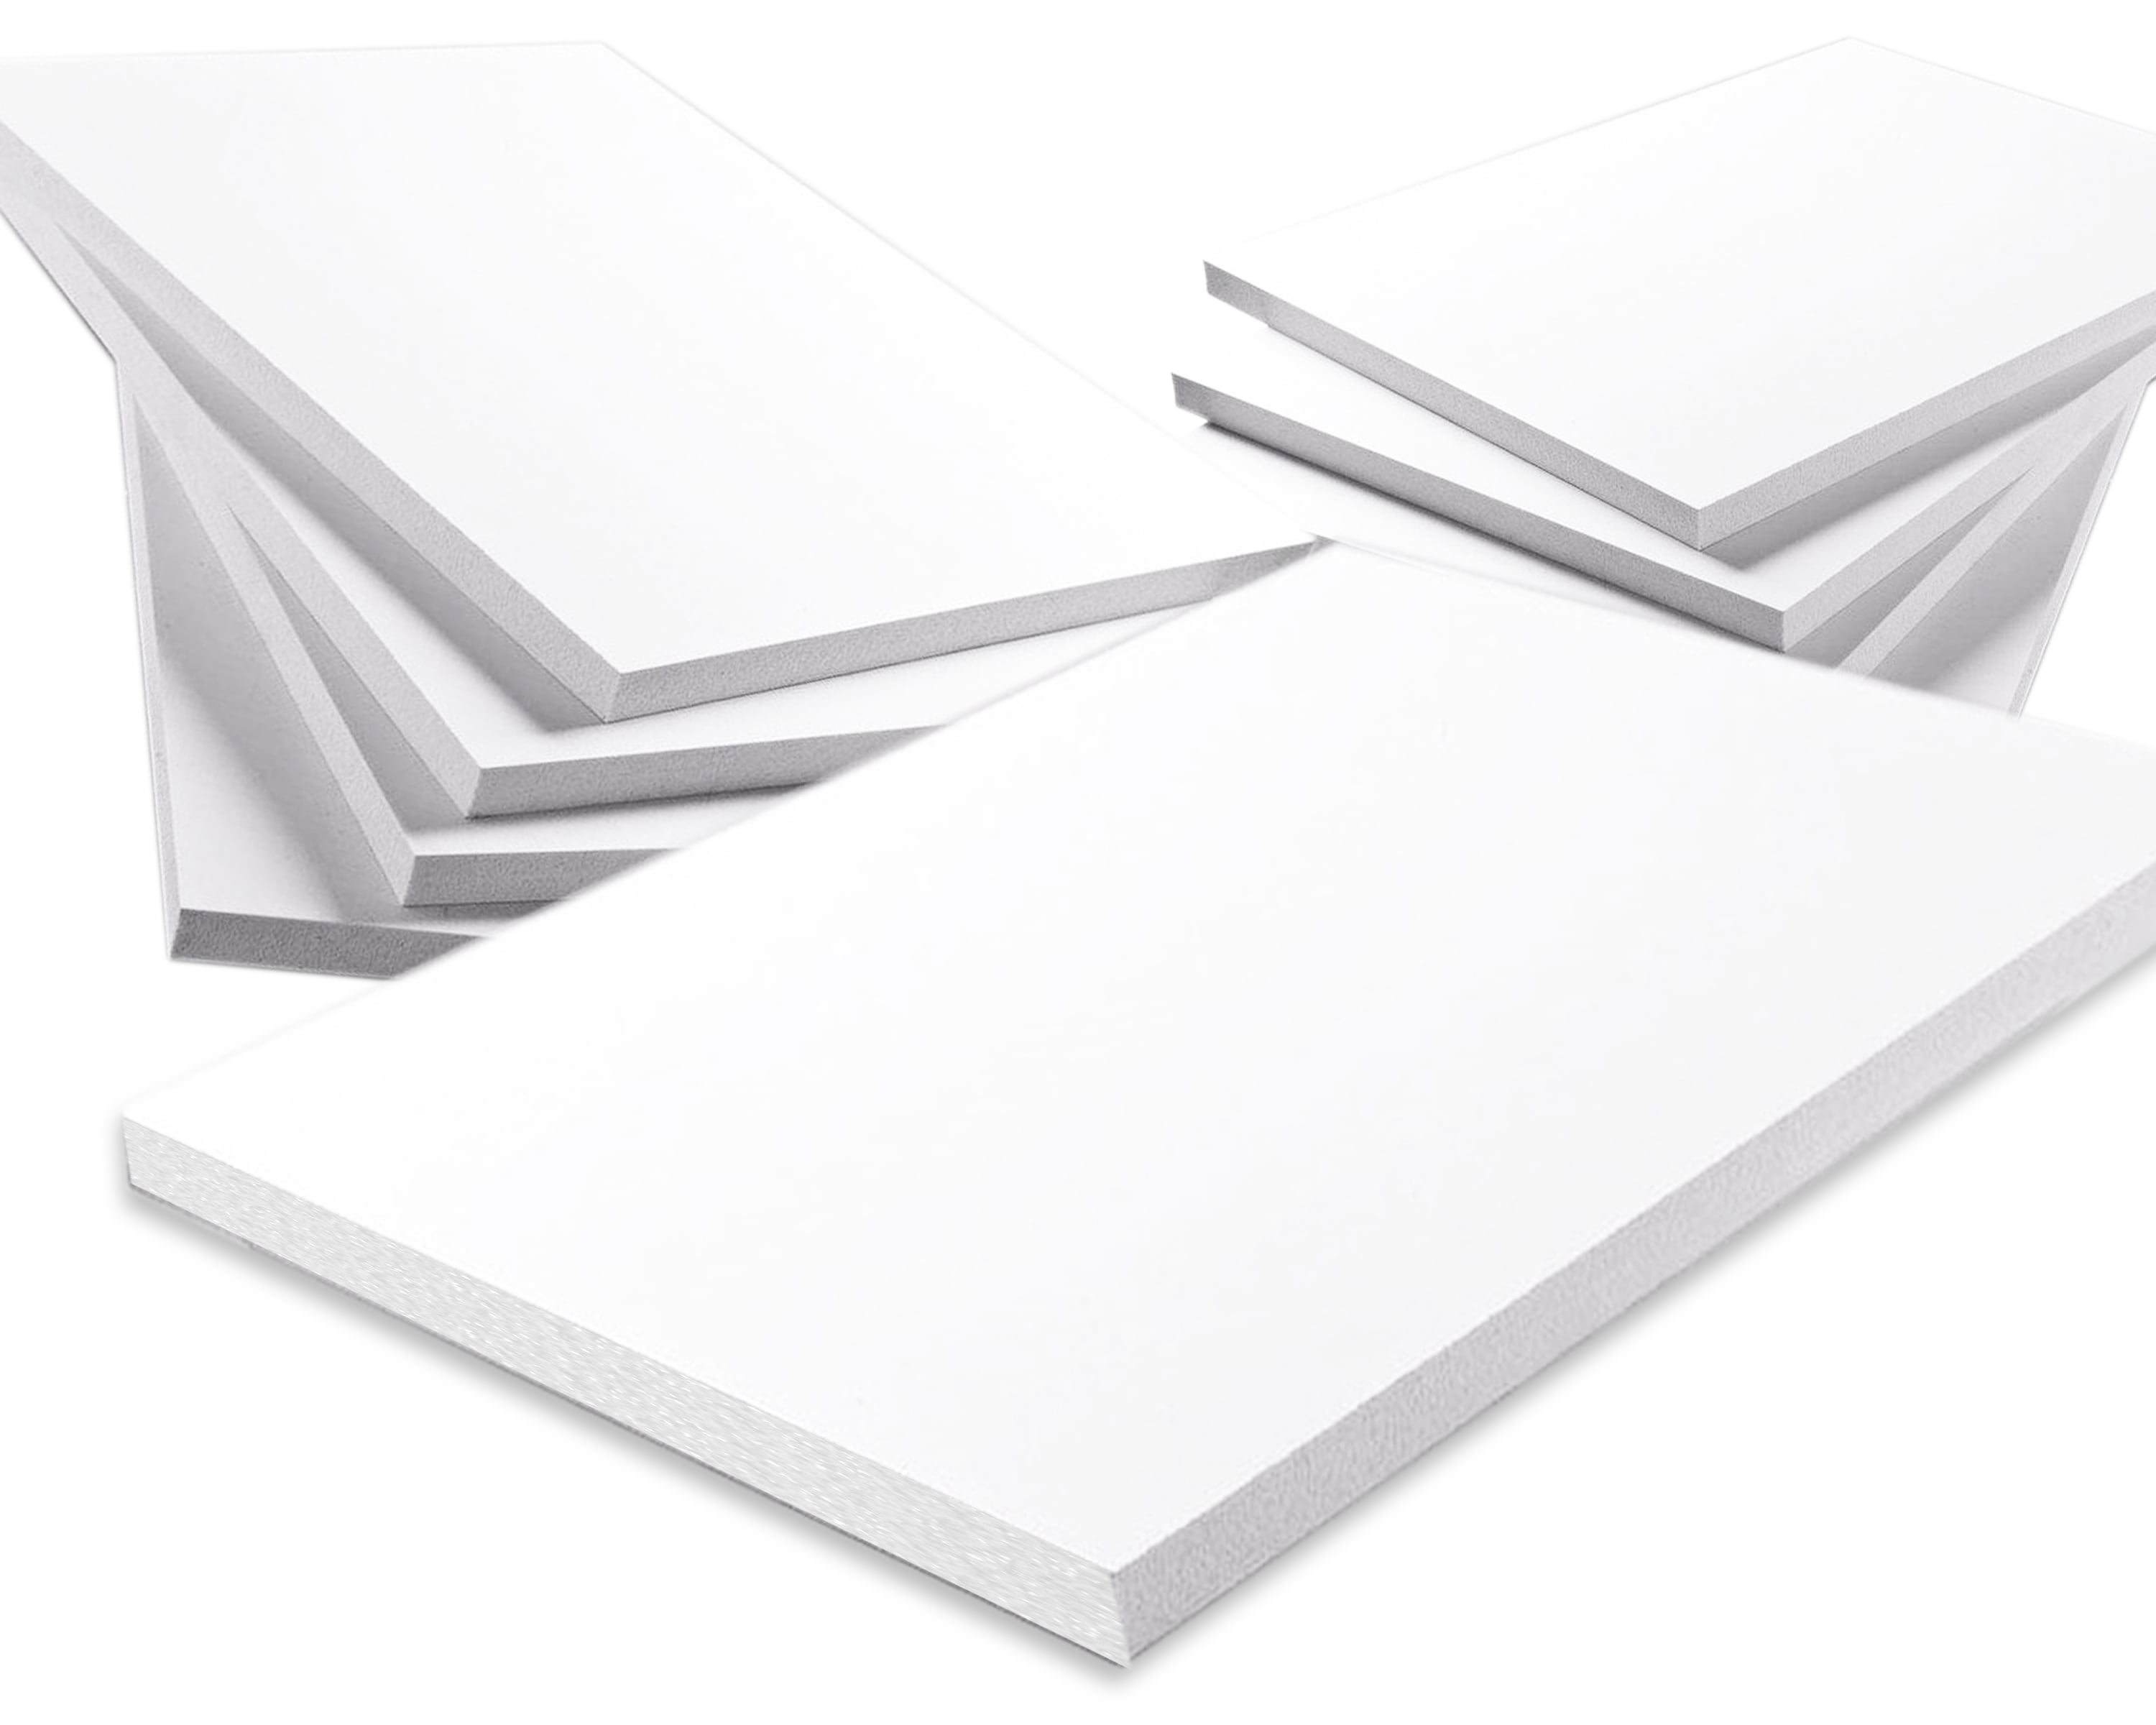 Foam Core Backing Board 3/8 White 24x36- 25 Pack. Many Sizes Available.  Acid Free Buffered Craft Poster Board for Signs, Presentations, School,  Office and Art Projects 